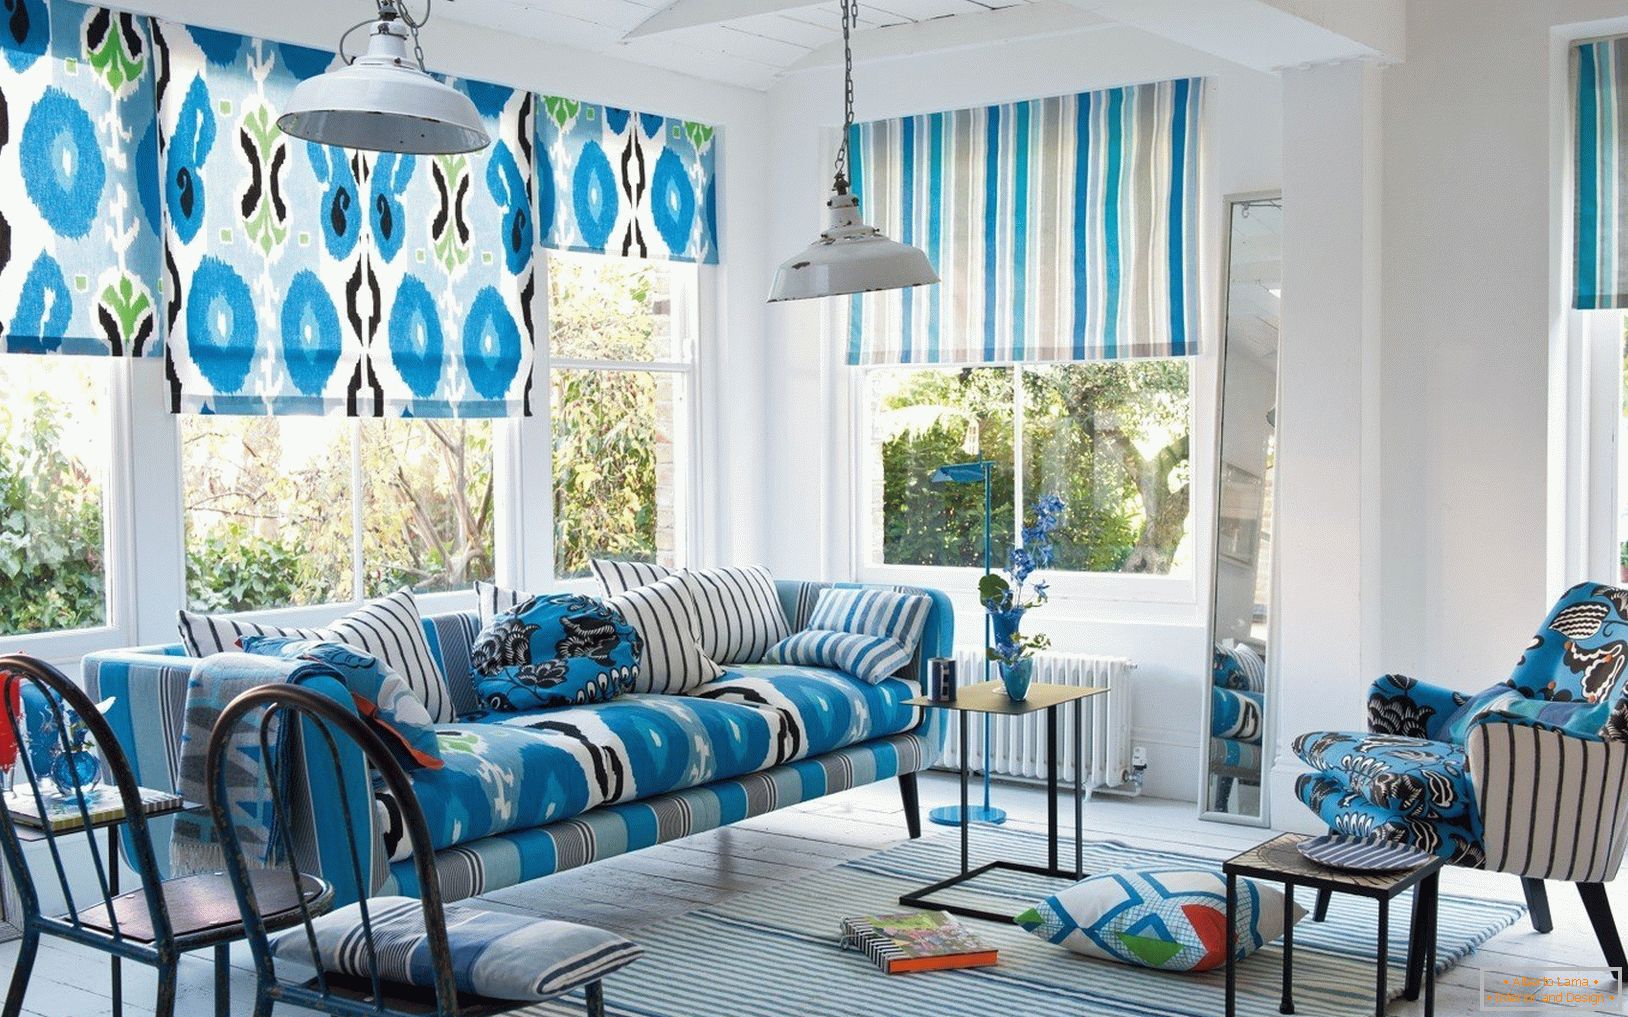 Curtains and furniture with shades of blue